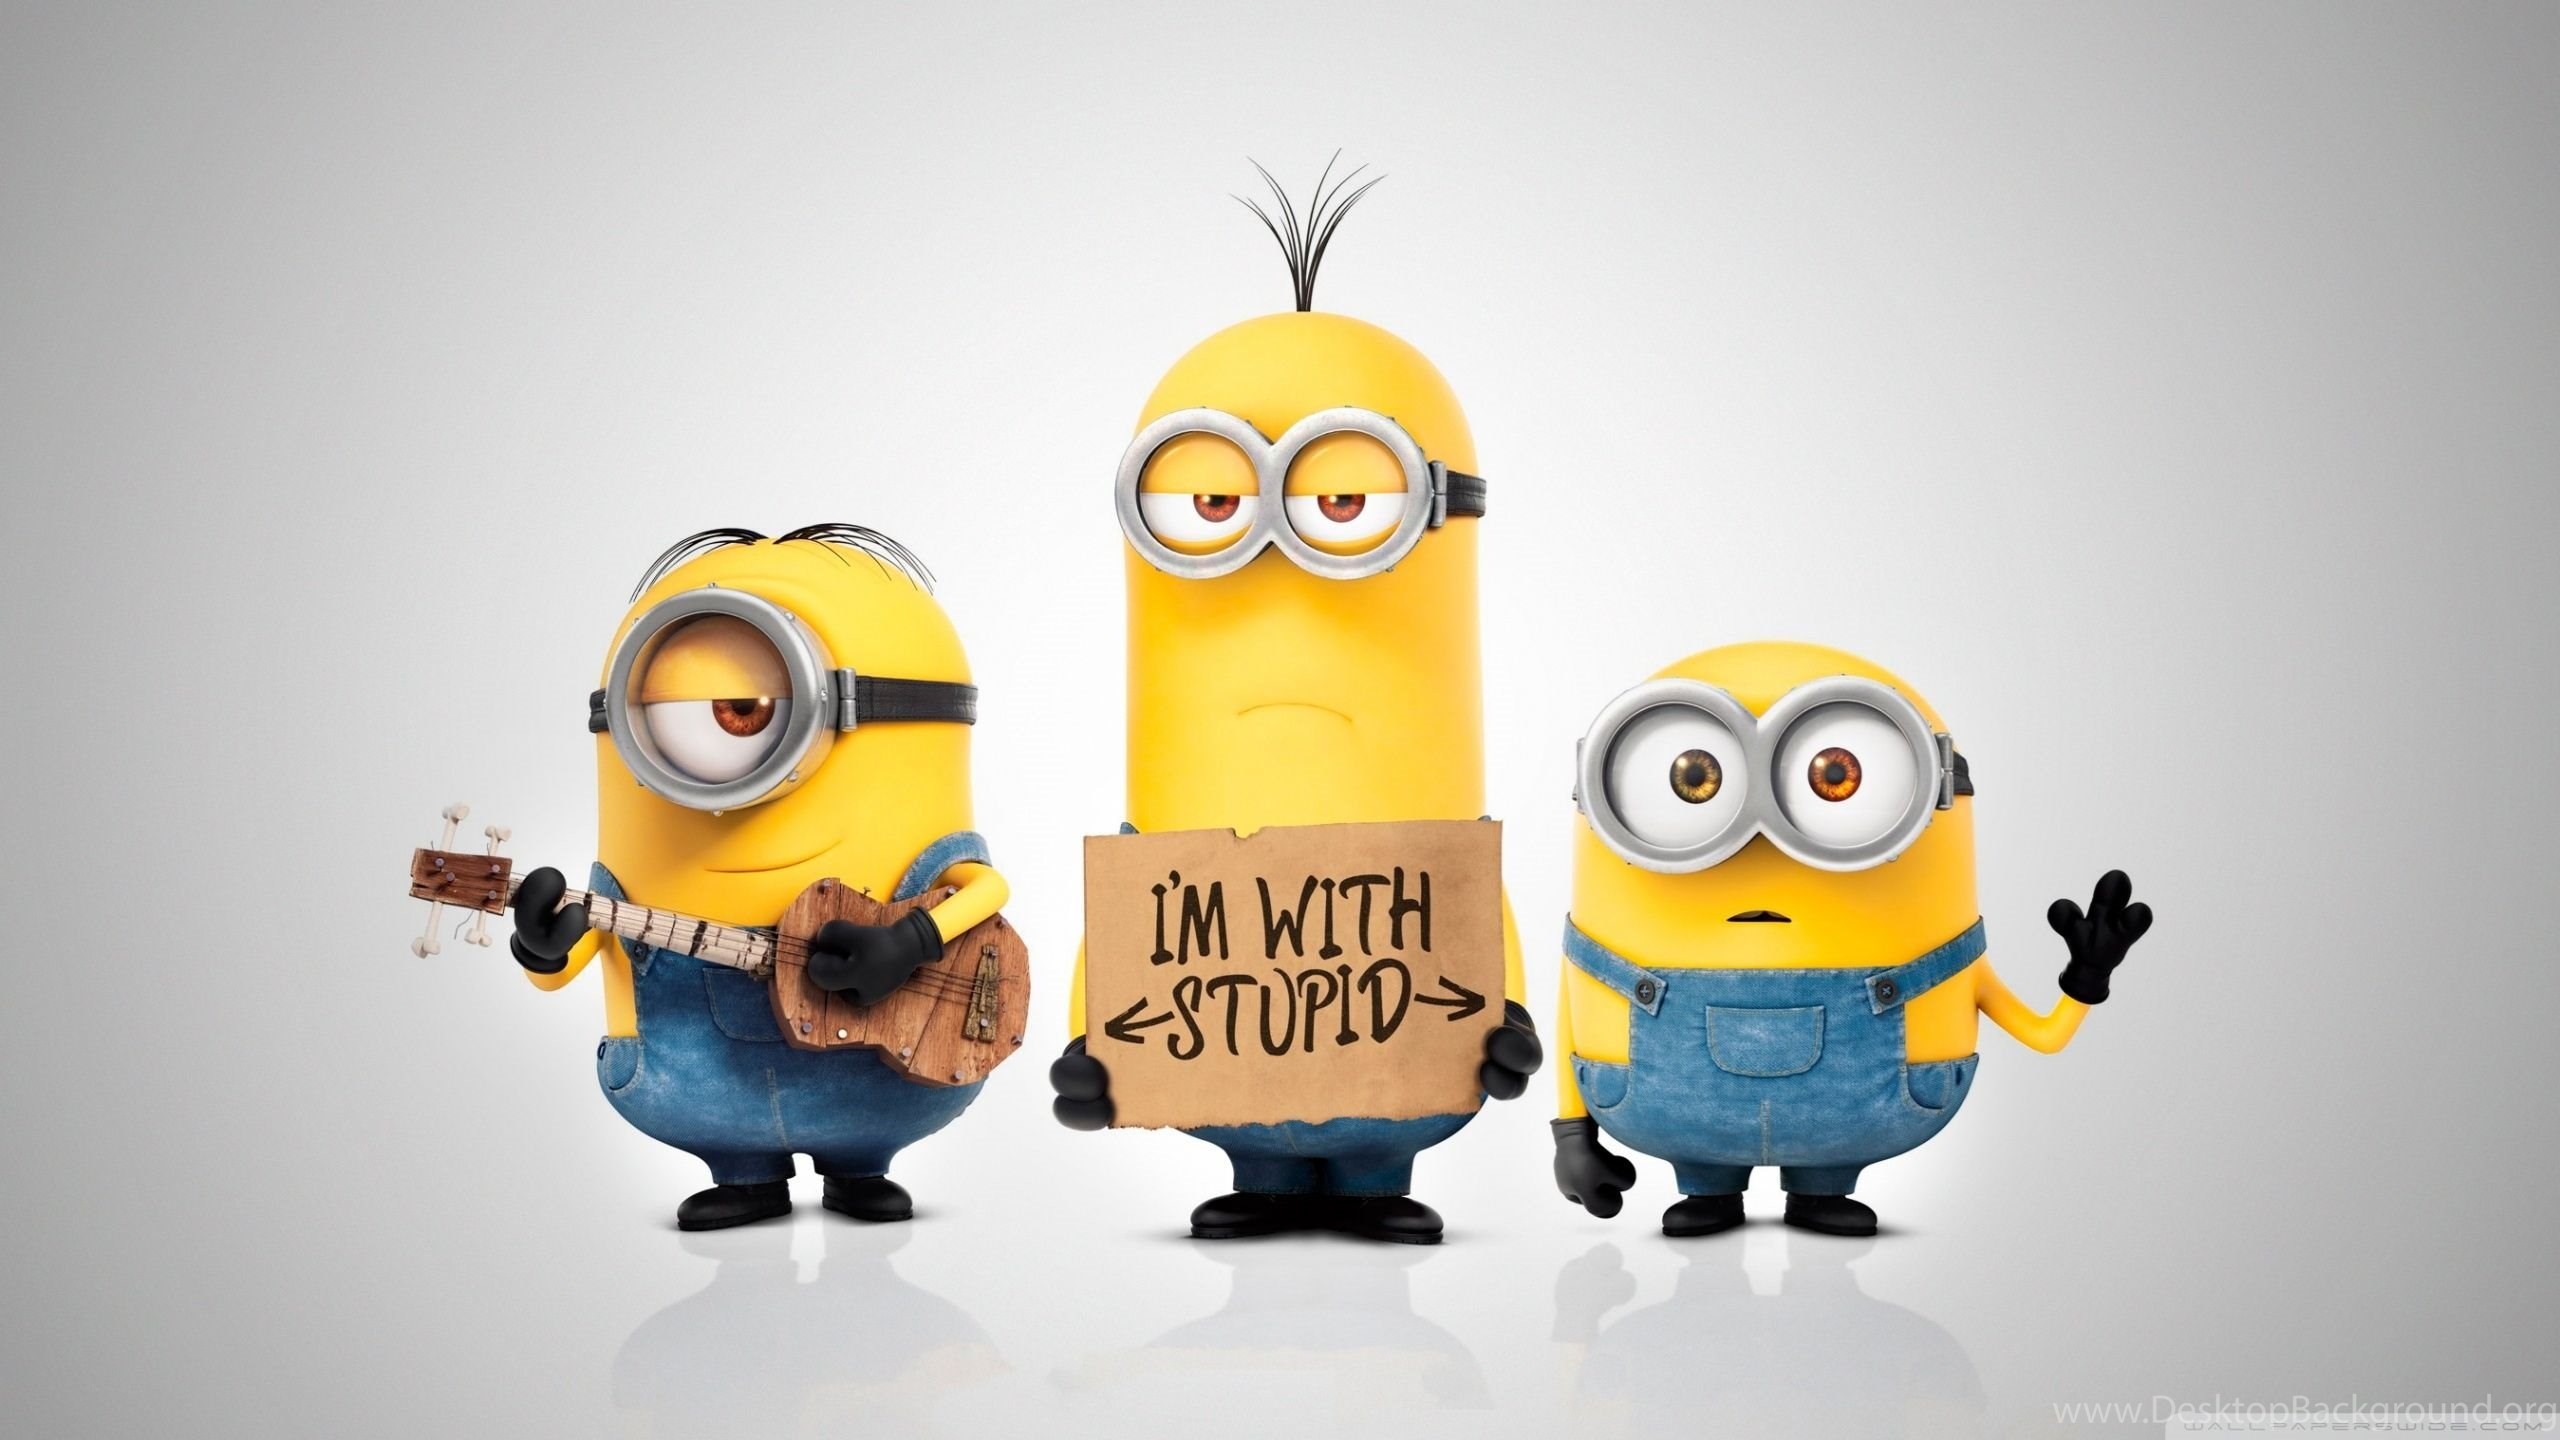 2560x1440 Download This Beautiful Movie Wallpapers Of Minions I'm With Stupid .